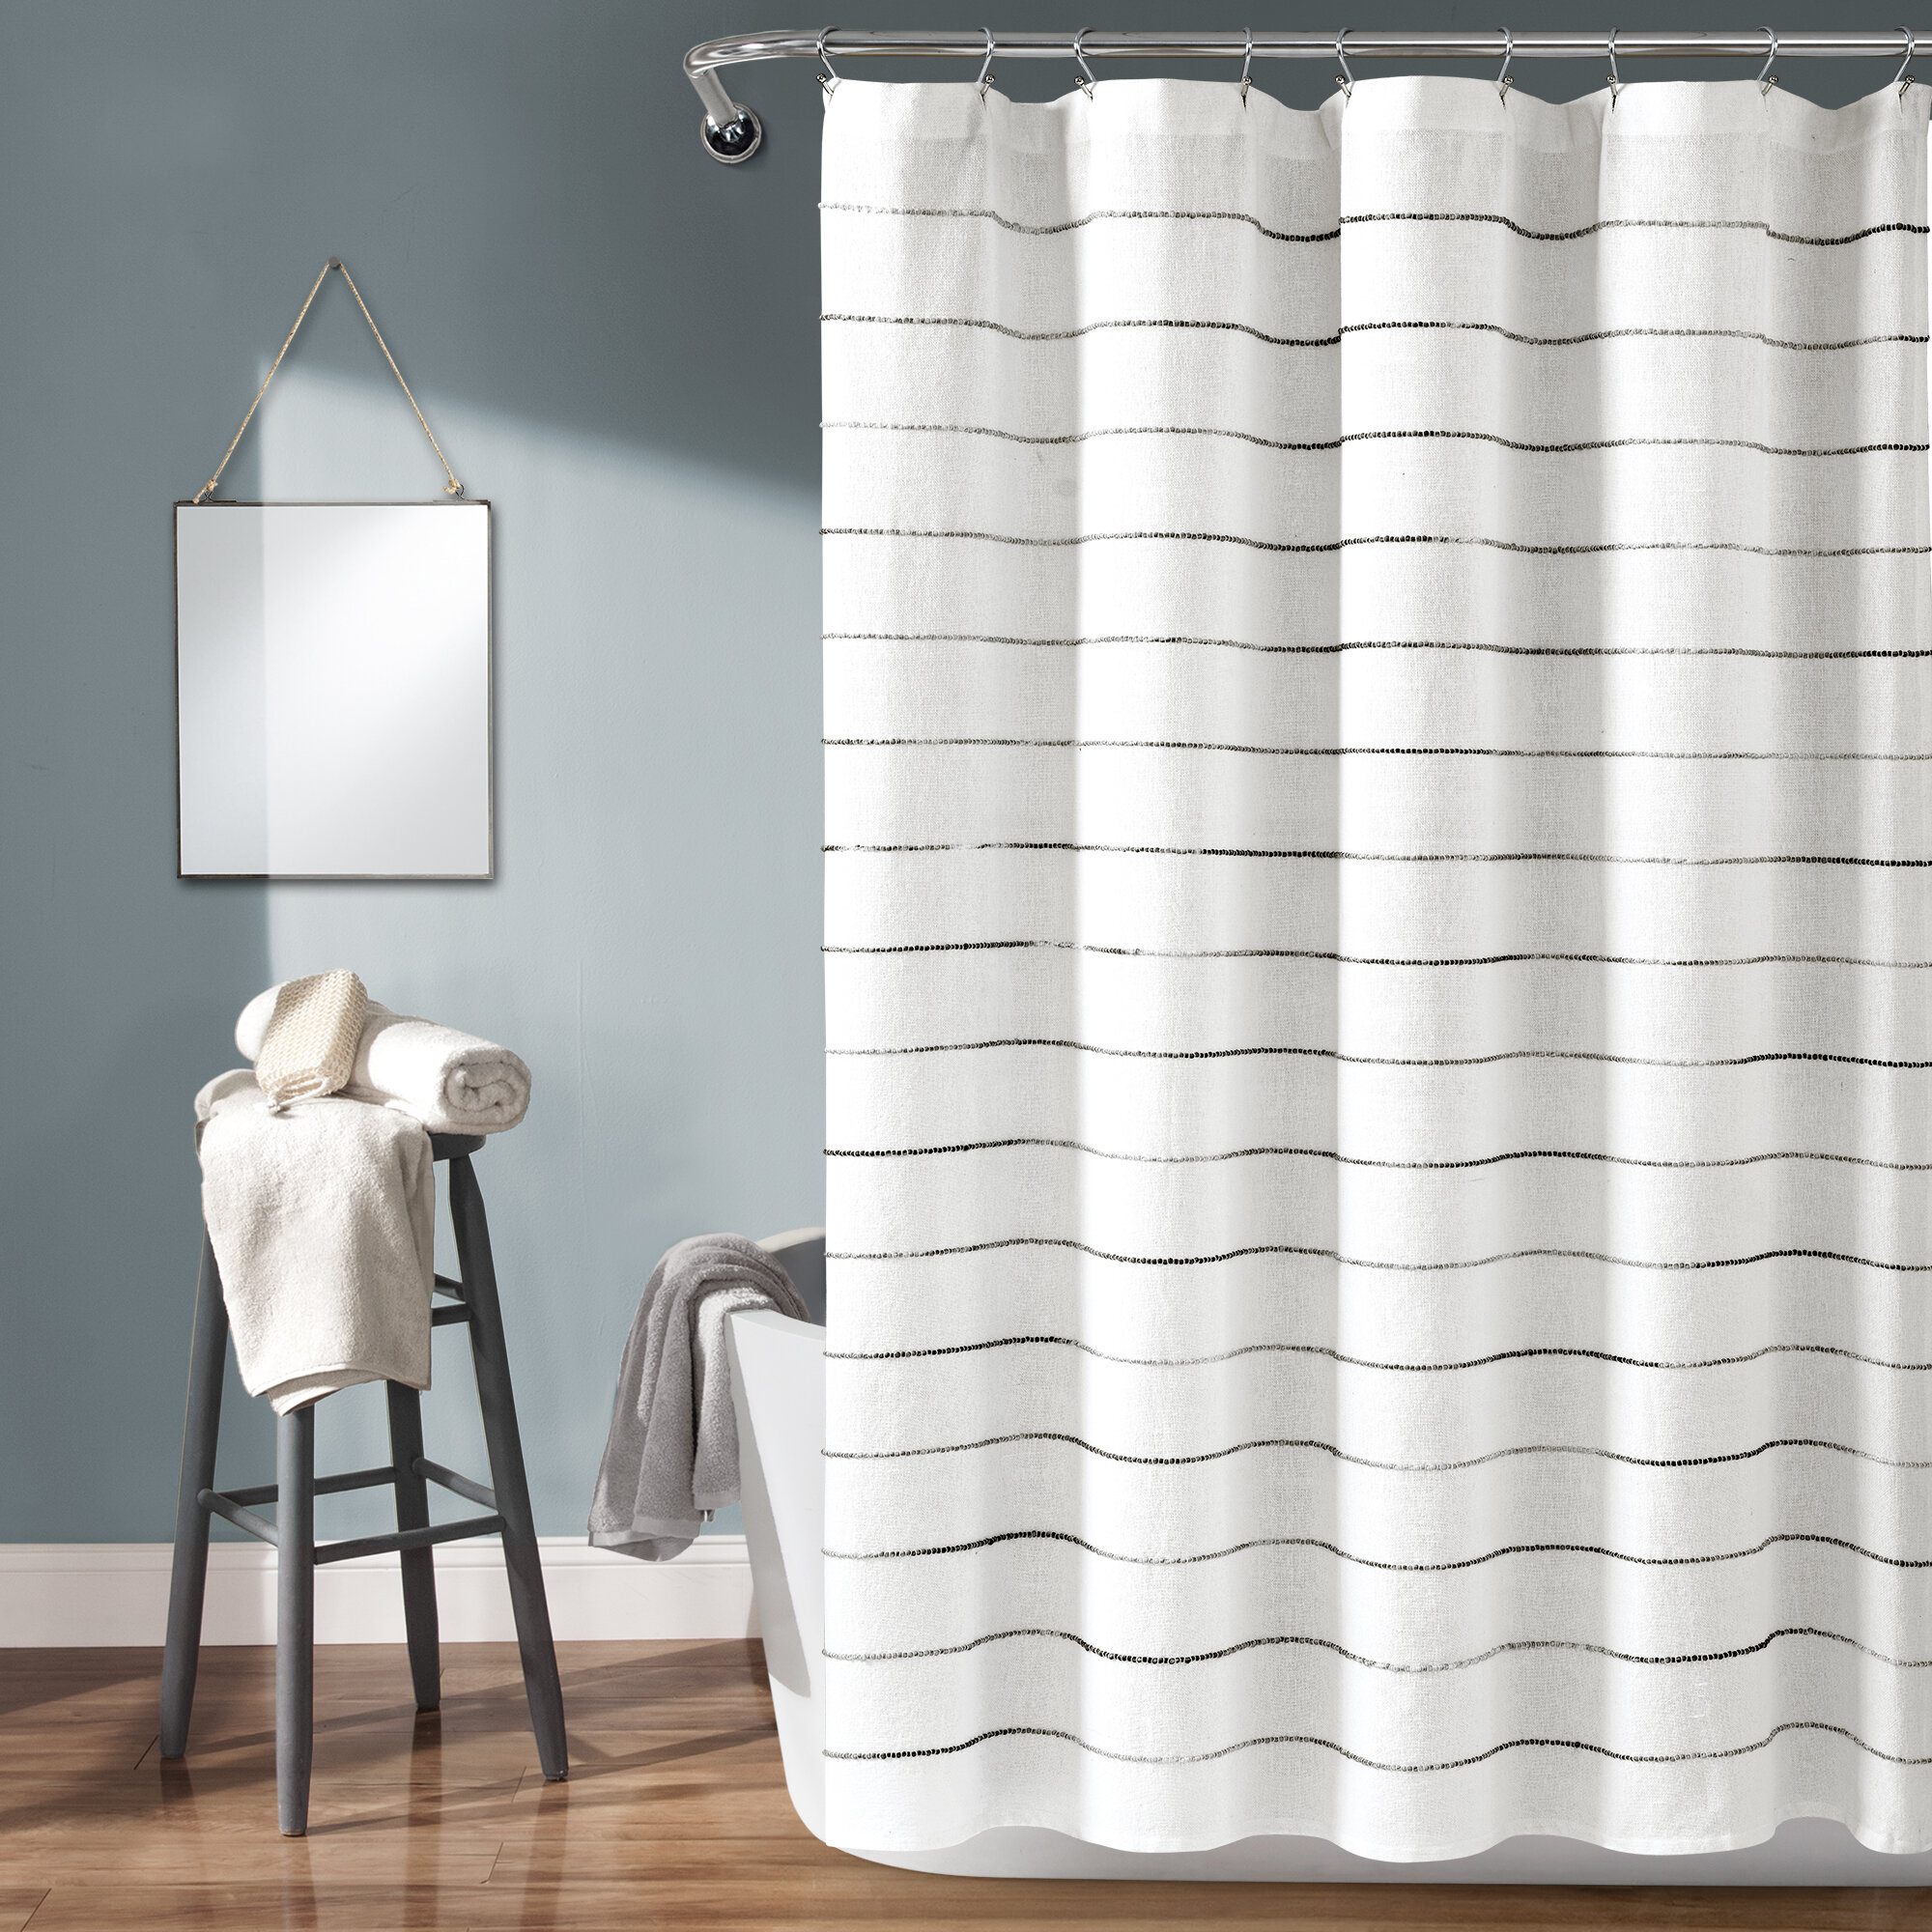 Jasion Shower Curtain Set Beige White Stripes Waterproof Fabric Bathroom Curtains Home Bath Decor with 12 Hooks 72 X 72 Inches